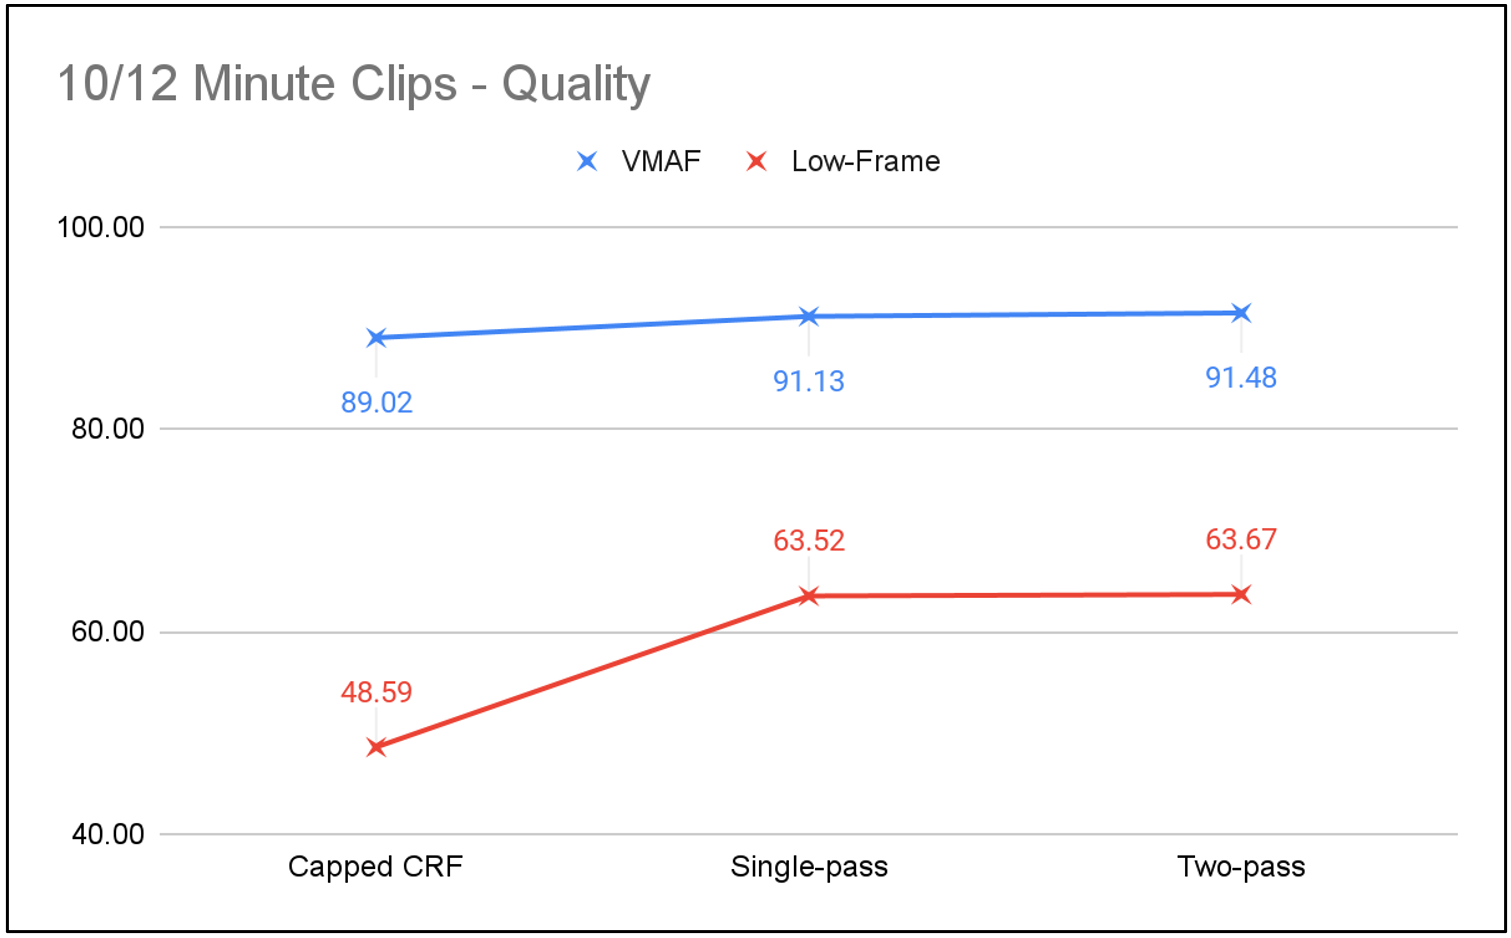 Figure 7. Quality differentials in the two longer clips.